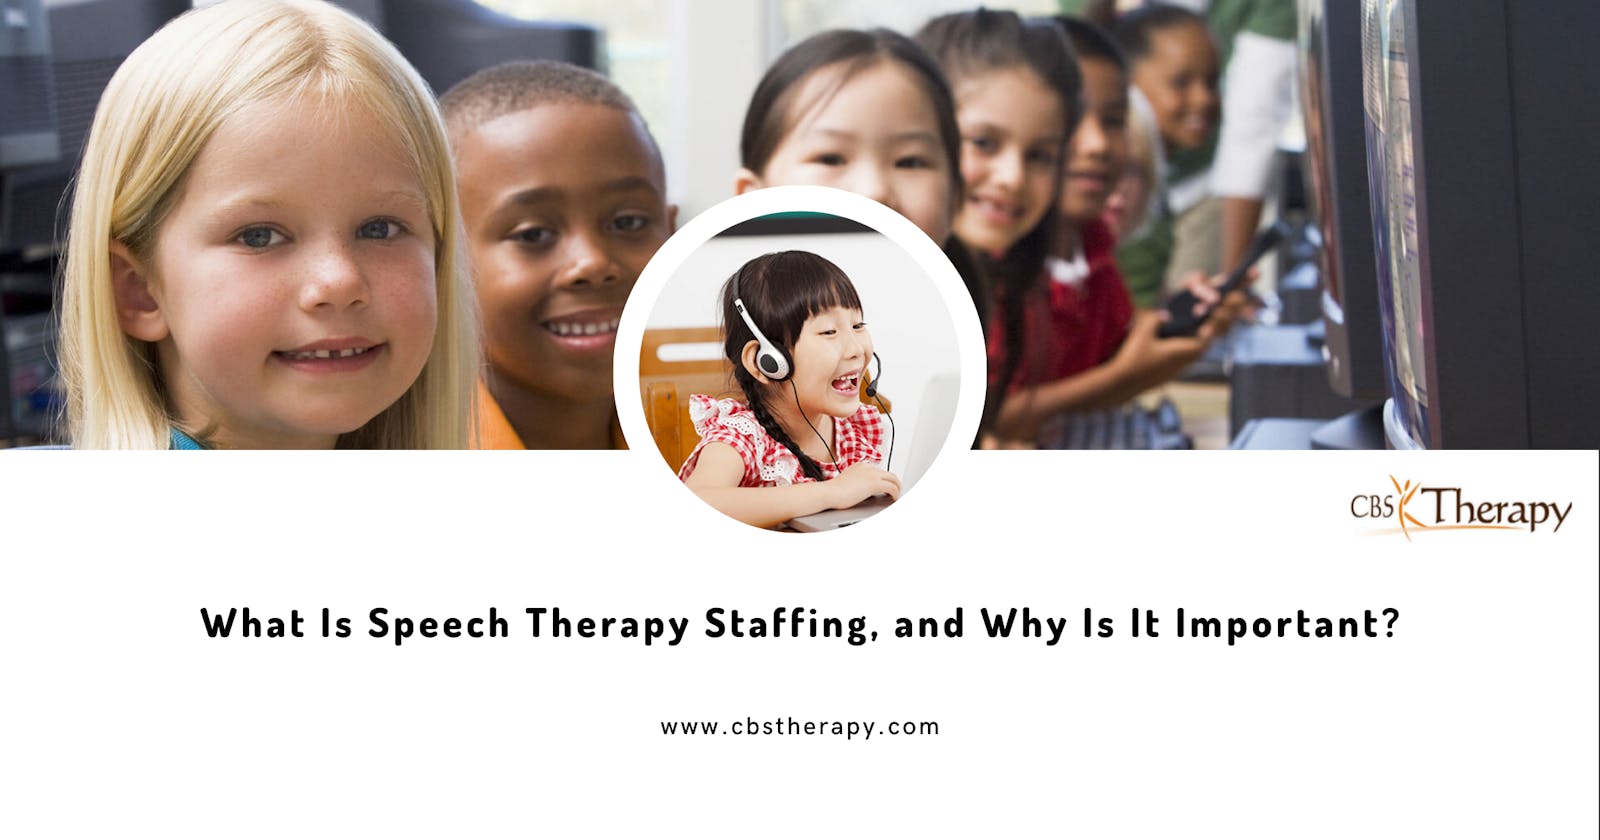 What Is Speech Therapy Staffing, and Why Is It Important?